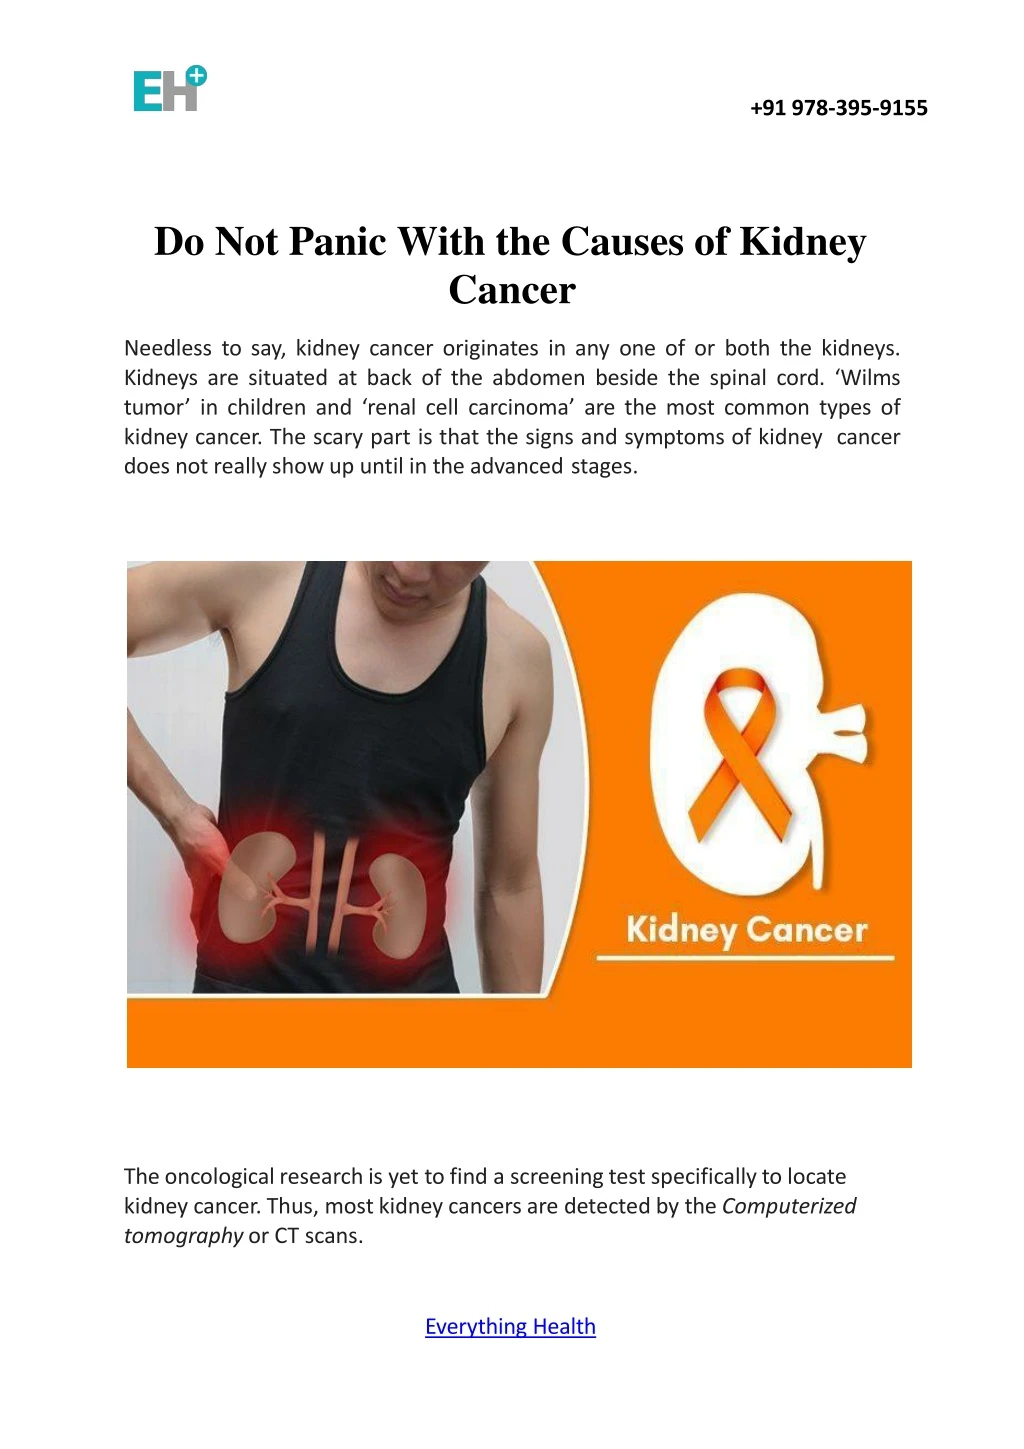 do not panic with the causes of kidney cancer